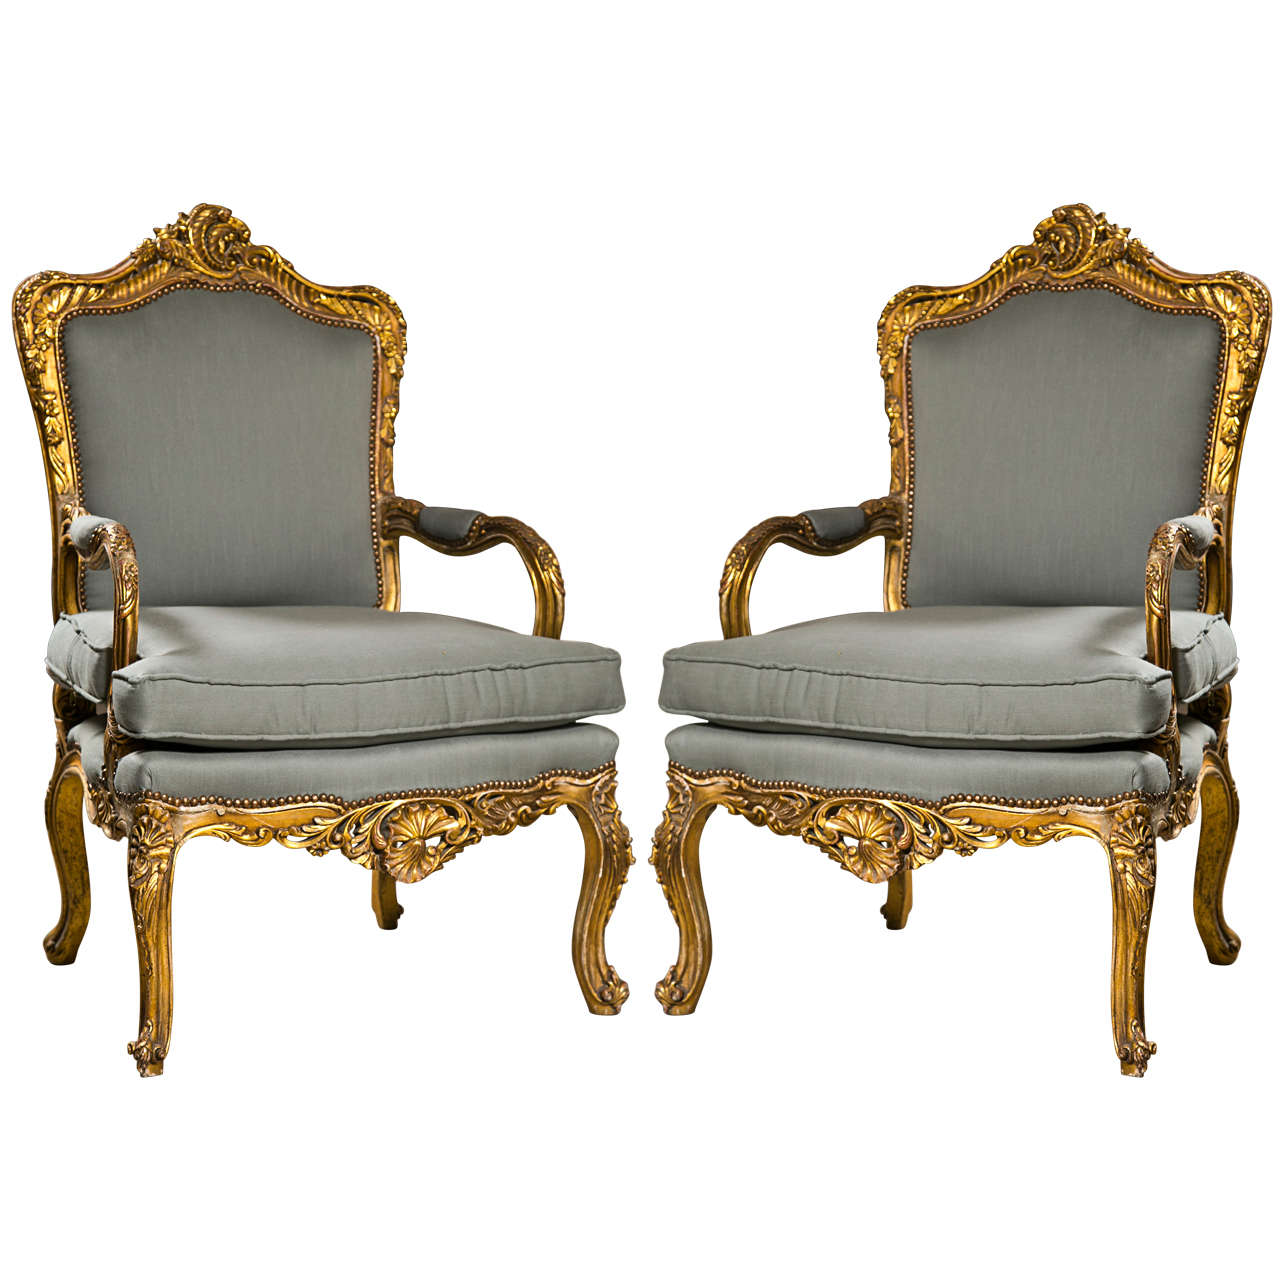 Pair of French Rococo Revival Arm Chairs